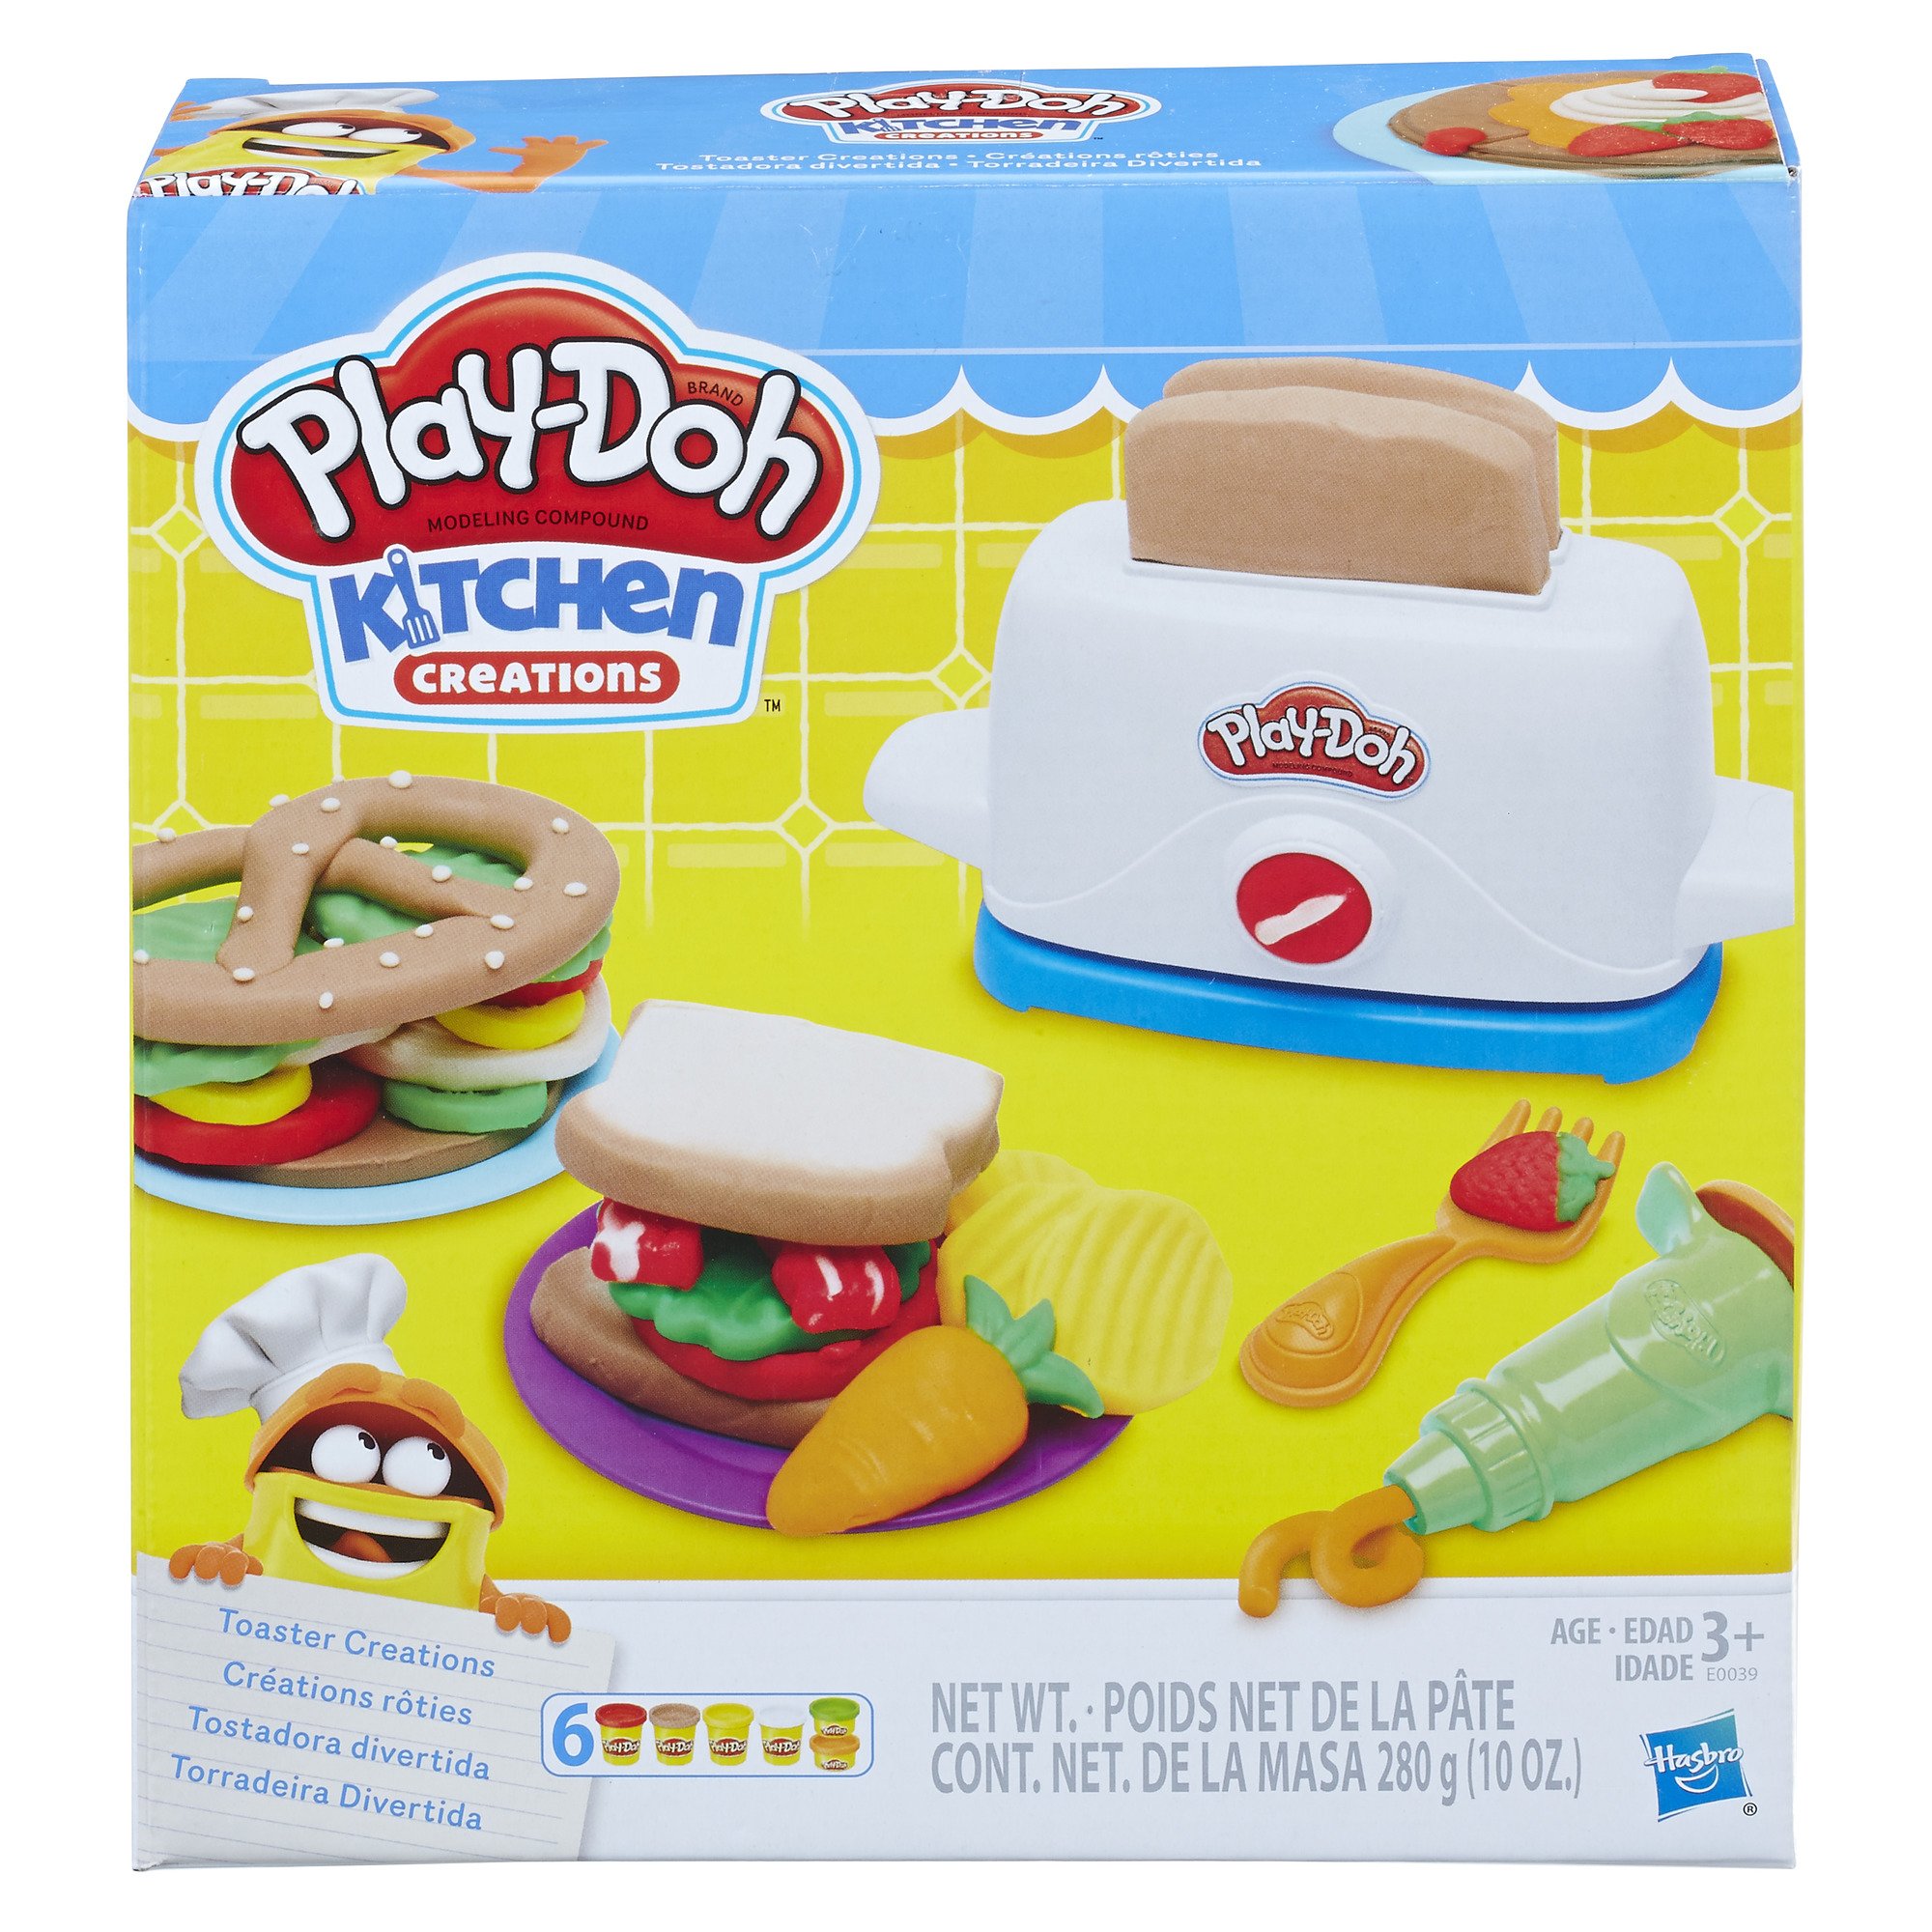 Play-Doh Kitchen Creations Toaster Creations Play Set, 6 Cans (10 oz) - image 2 of 6